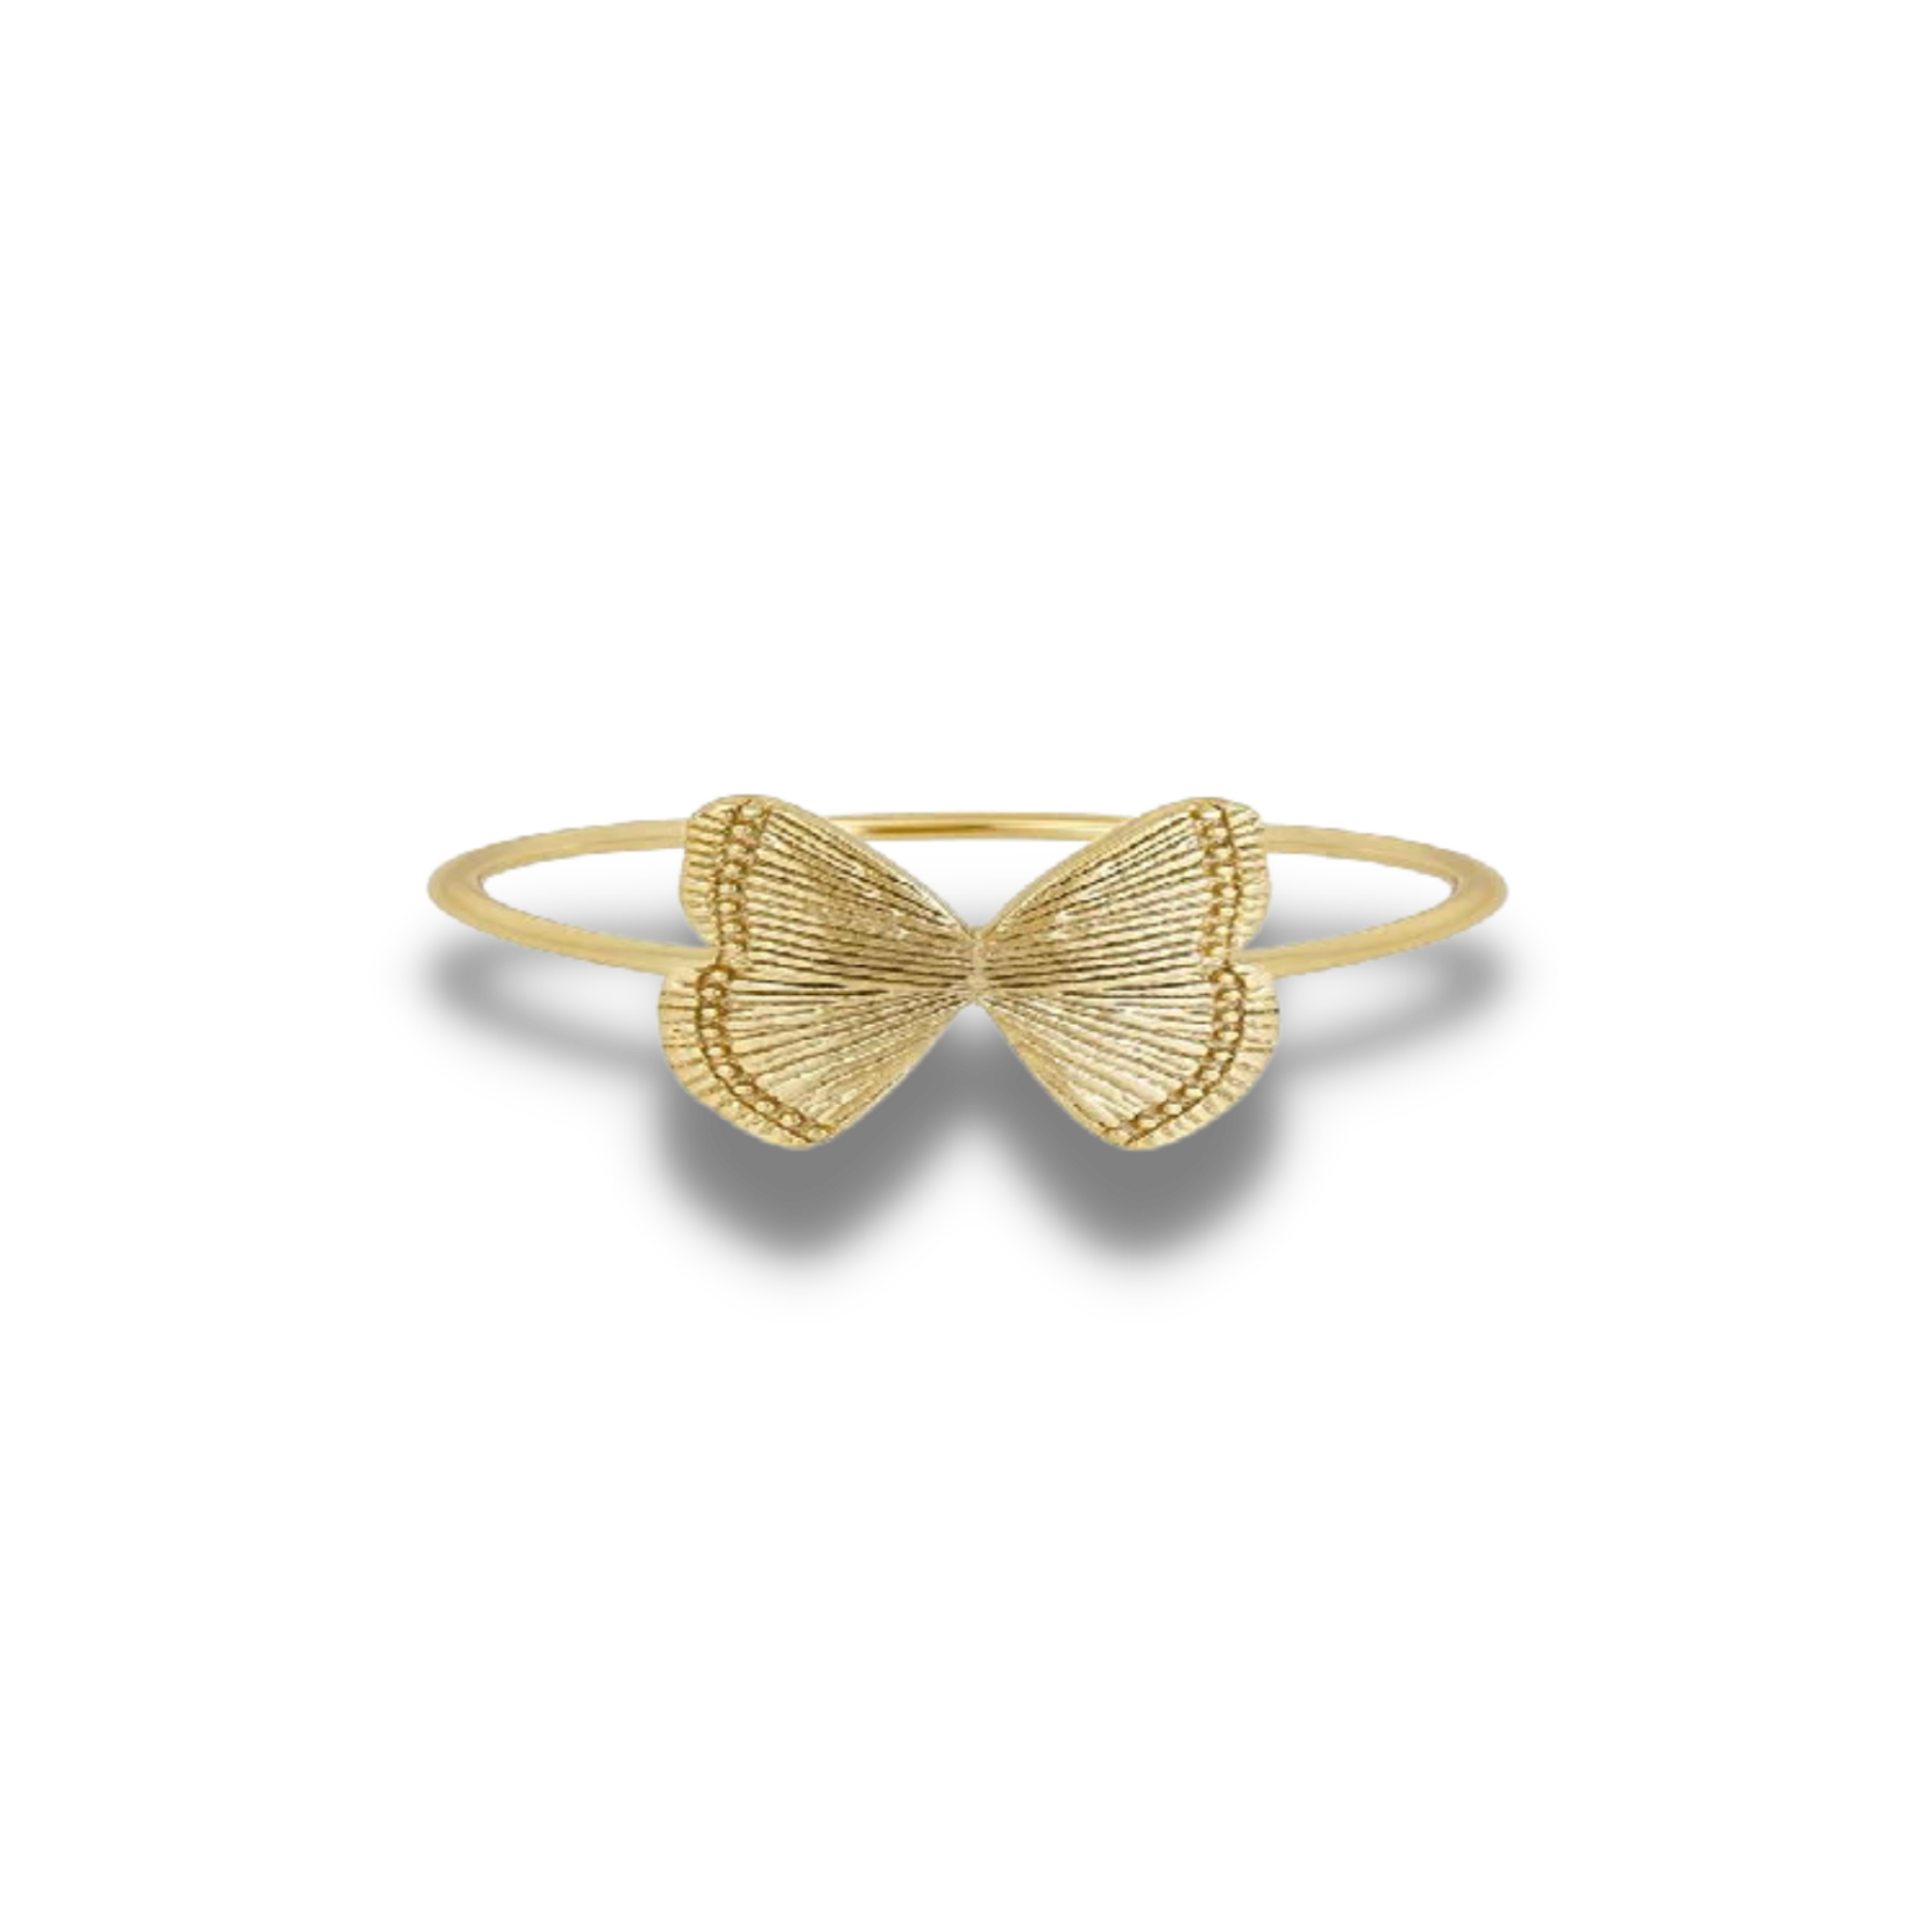 Born to Fly Butterfly Wing Ring in Gold - Jewmei.com meaningful jewelry